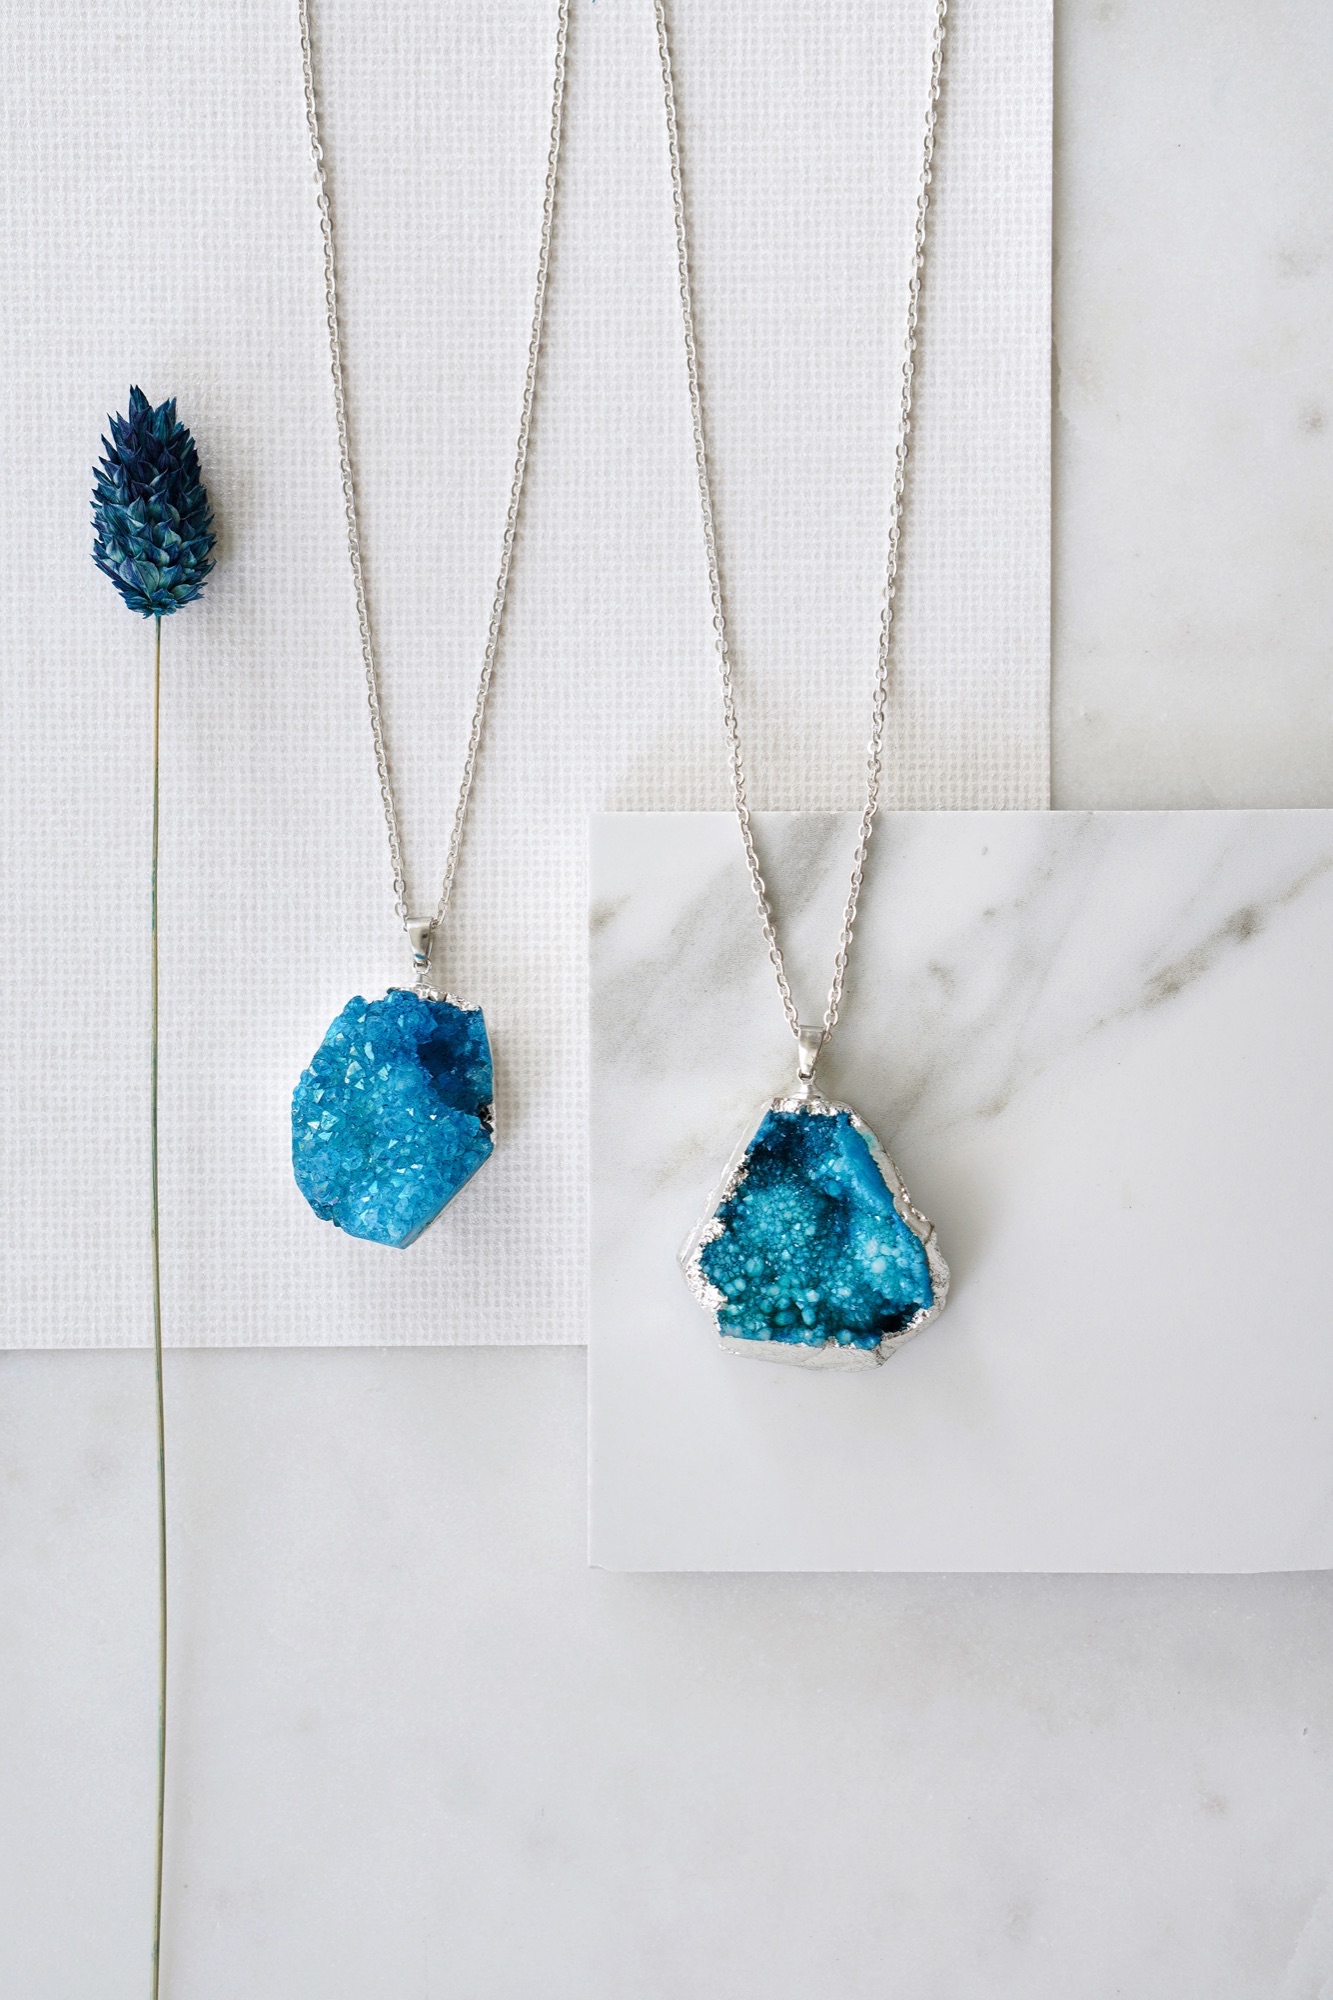 Blue Agate Pendant Necklace by Xander Kostroma